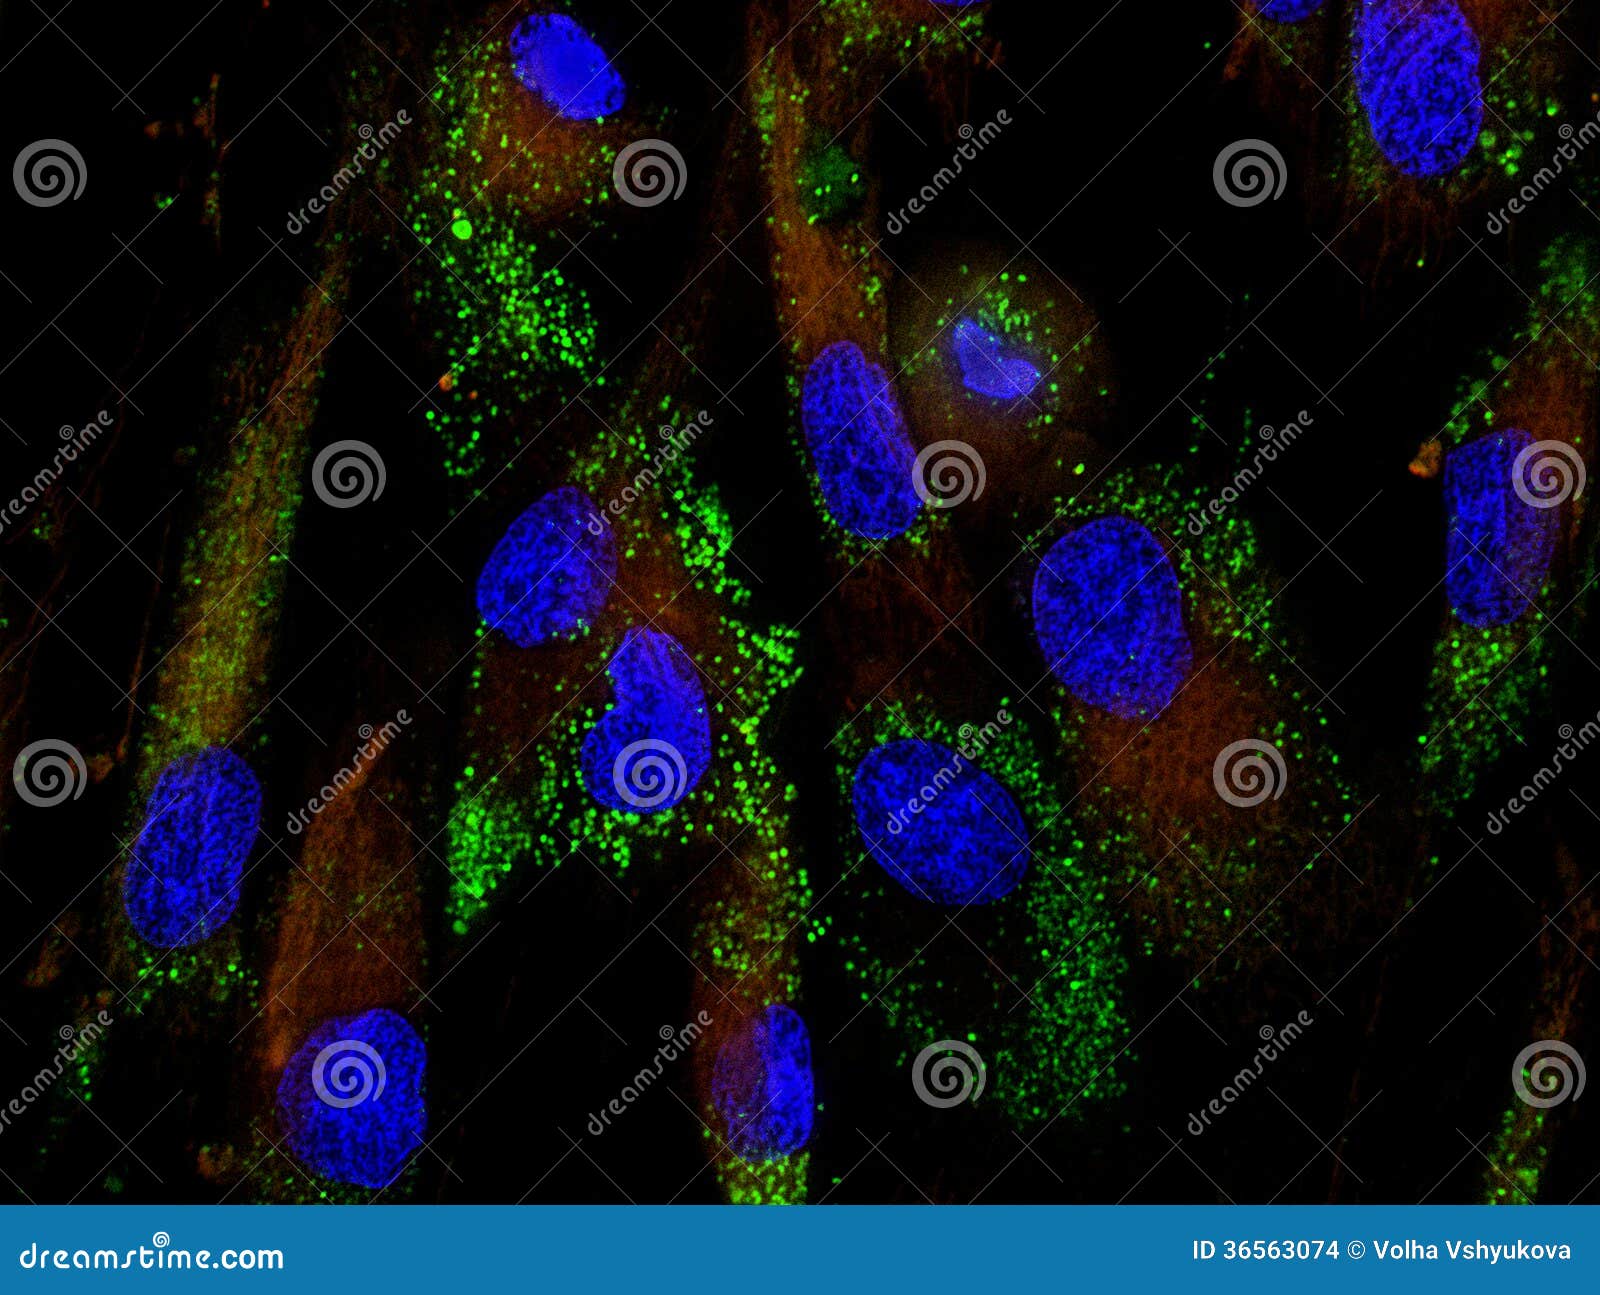 mesenchymal stem cells labeled with fluorescent mo